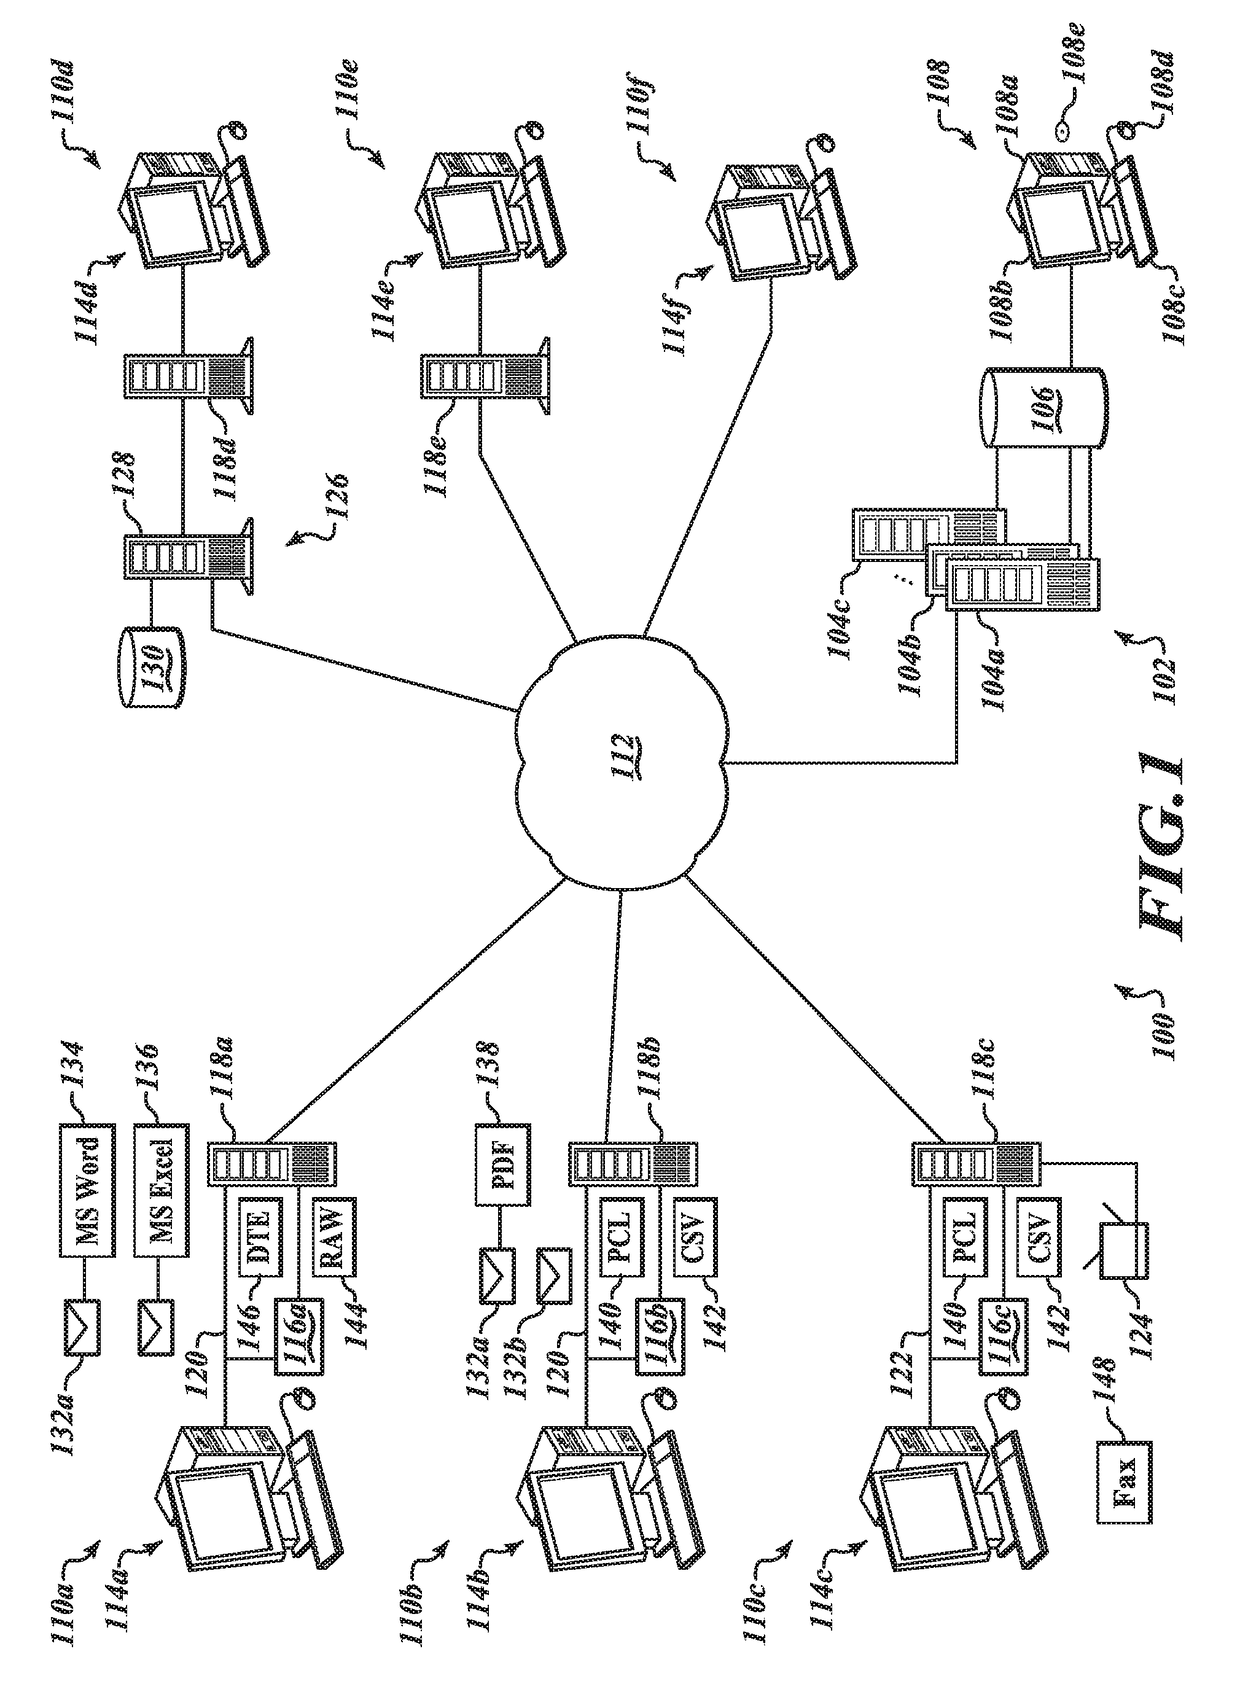 Systems, methods and articles to automatically transform documents transmitted between senders and recipients